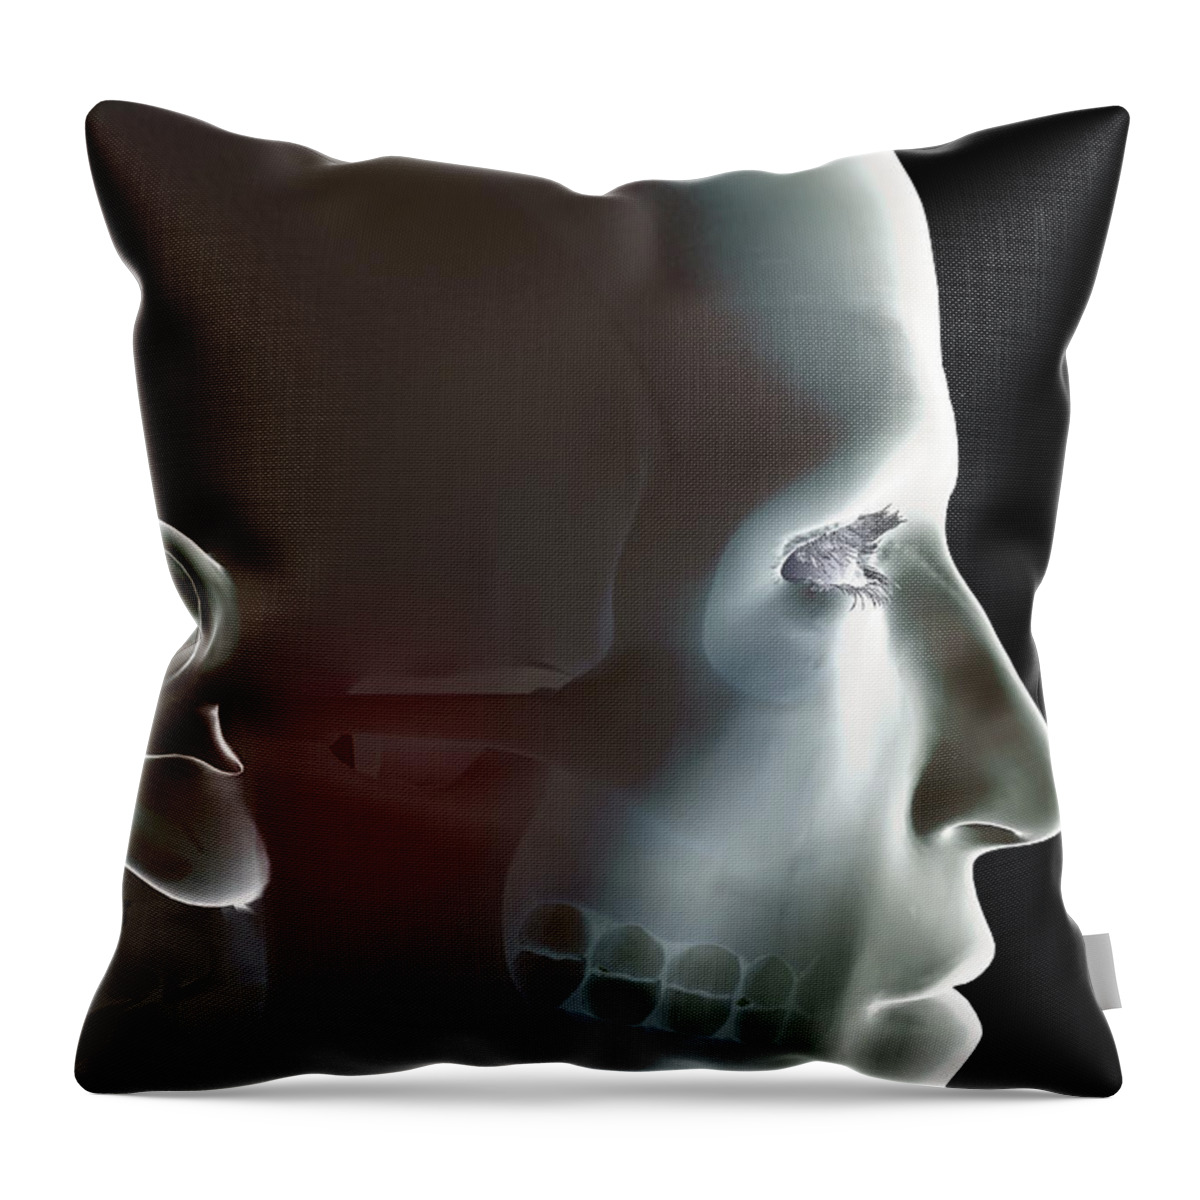 Eye Socket Throw Pillow featuring the photograph The Bones Of The Head by Science Picture Co